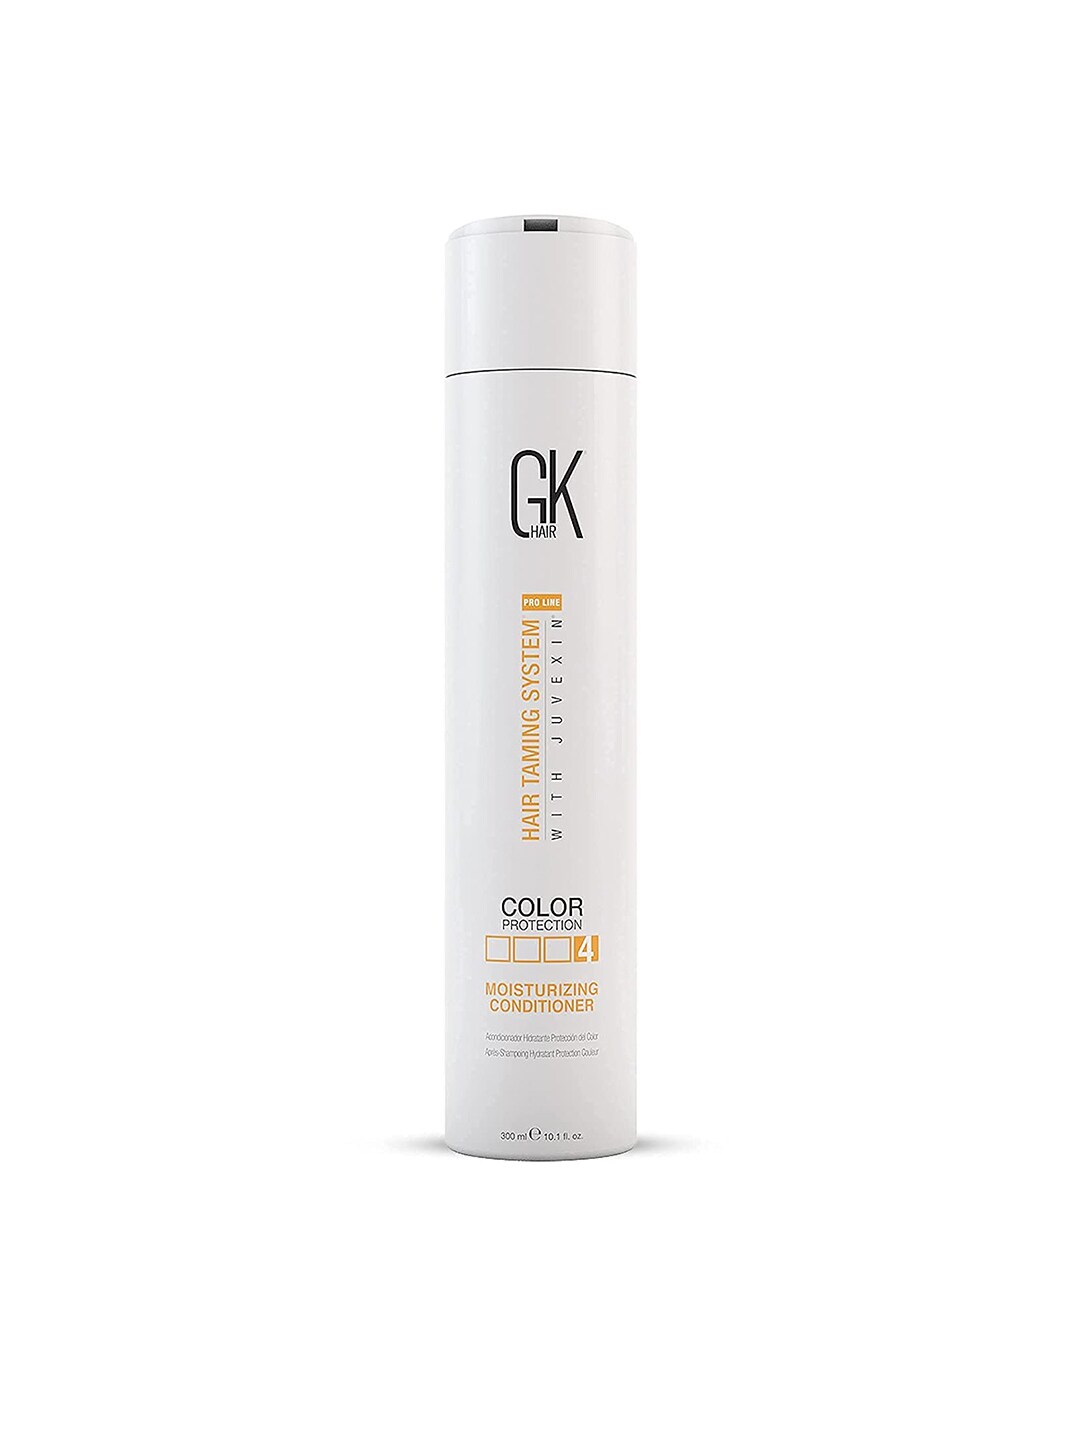 GK HAIR Color Protection Moisturizing Global Keratin Conditioner-300 ml Price in India